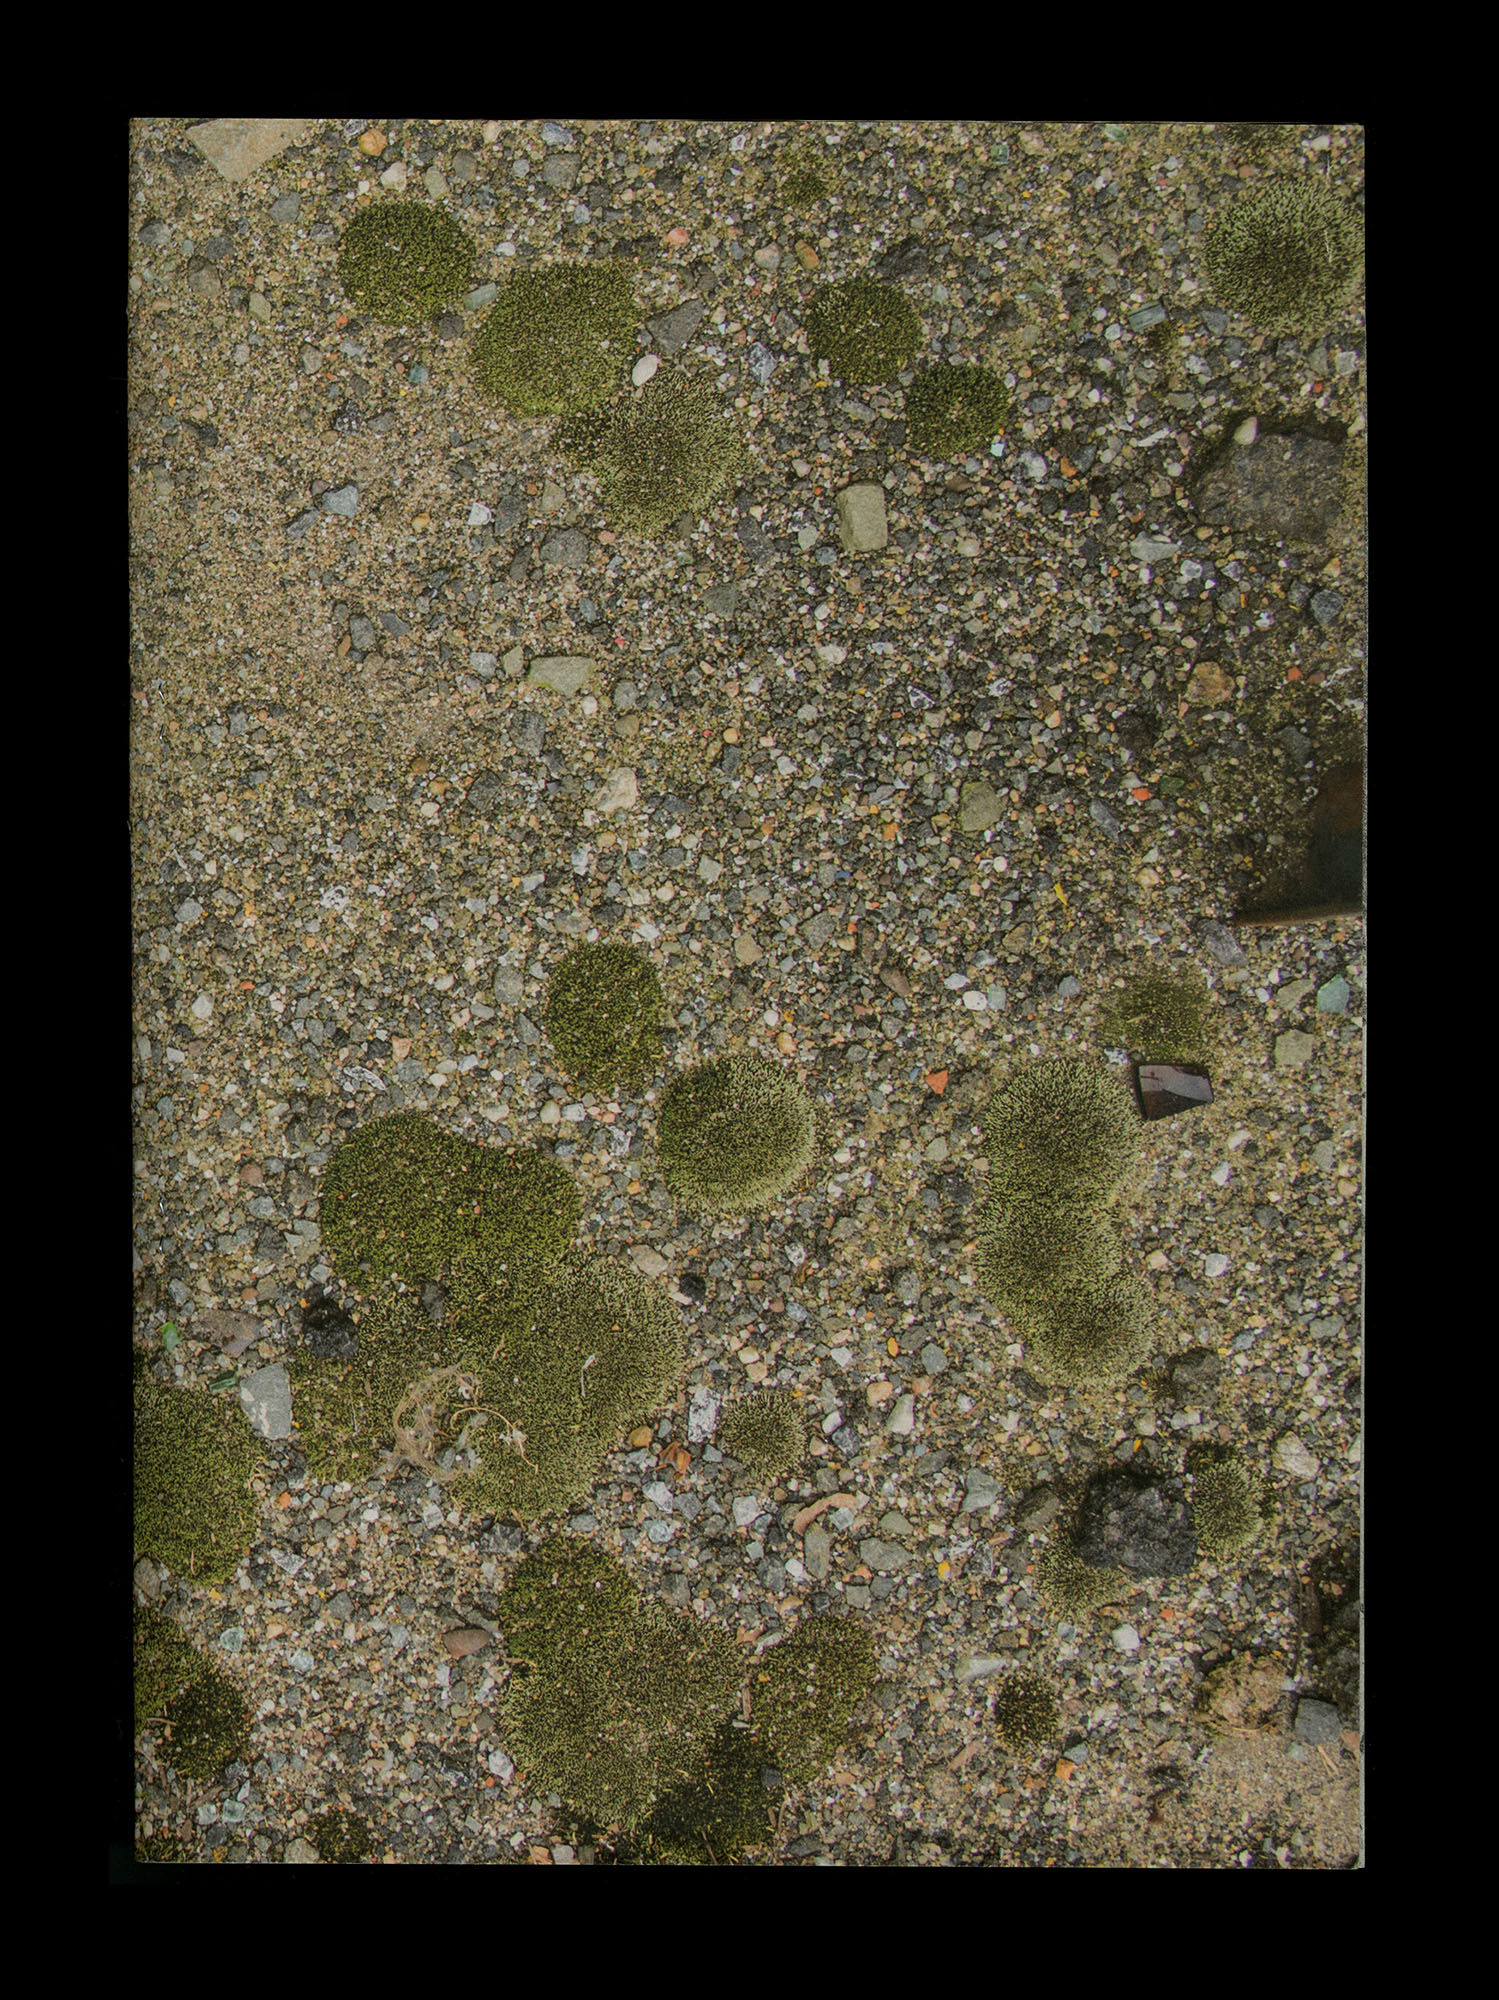 A publication cover lays on a black background. There are no words on the cover, just a close-up image of the ground. Sand, broken glass and green moss.